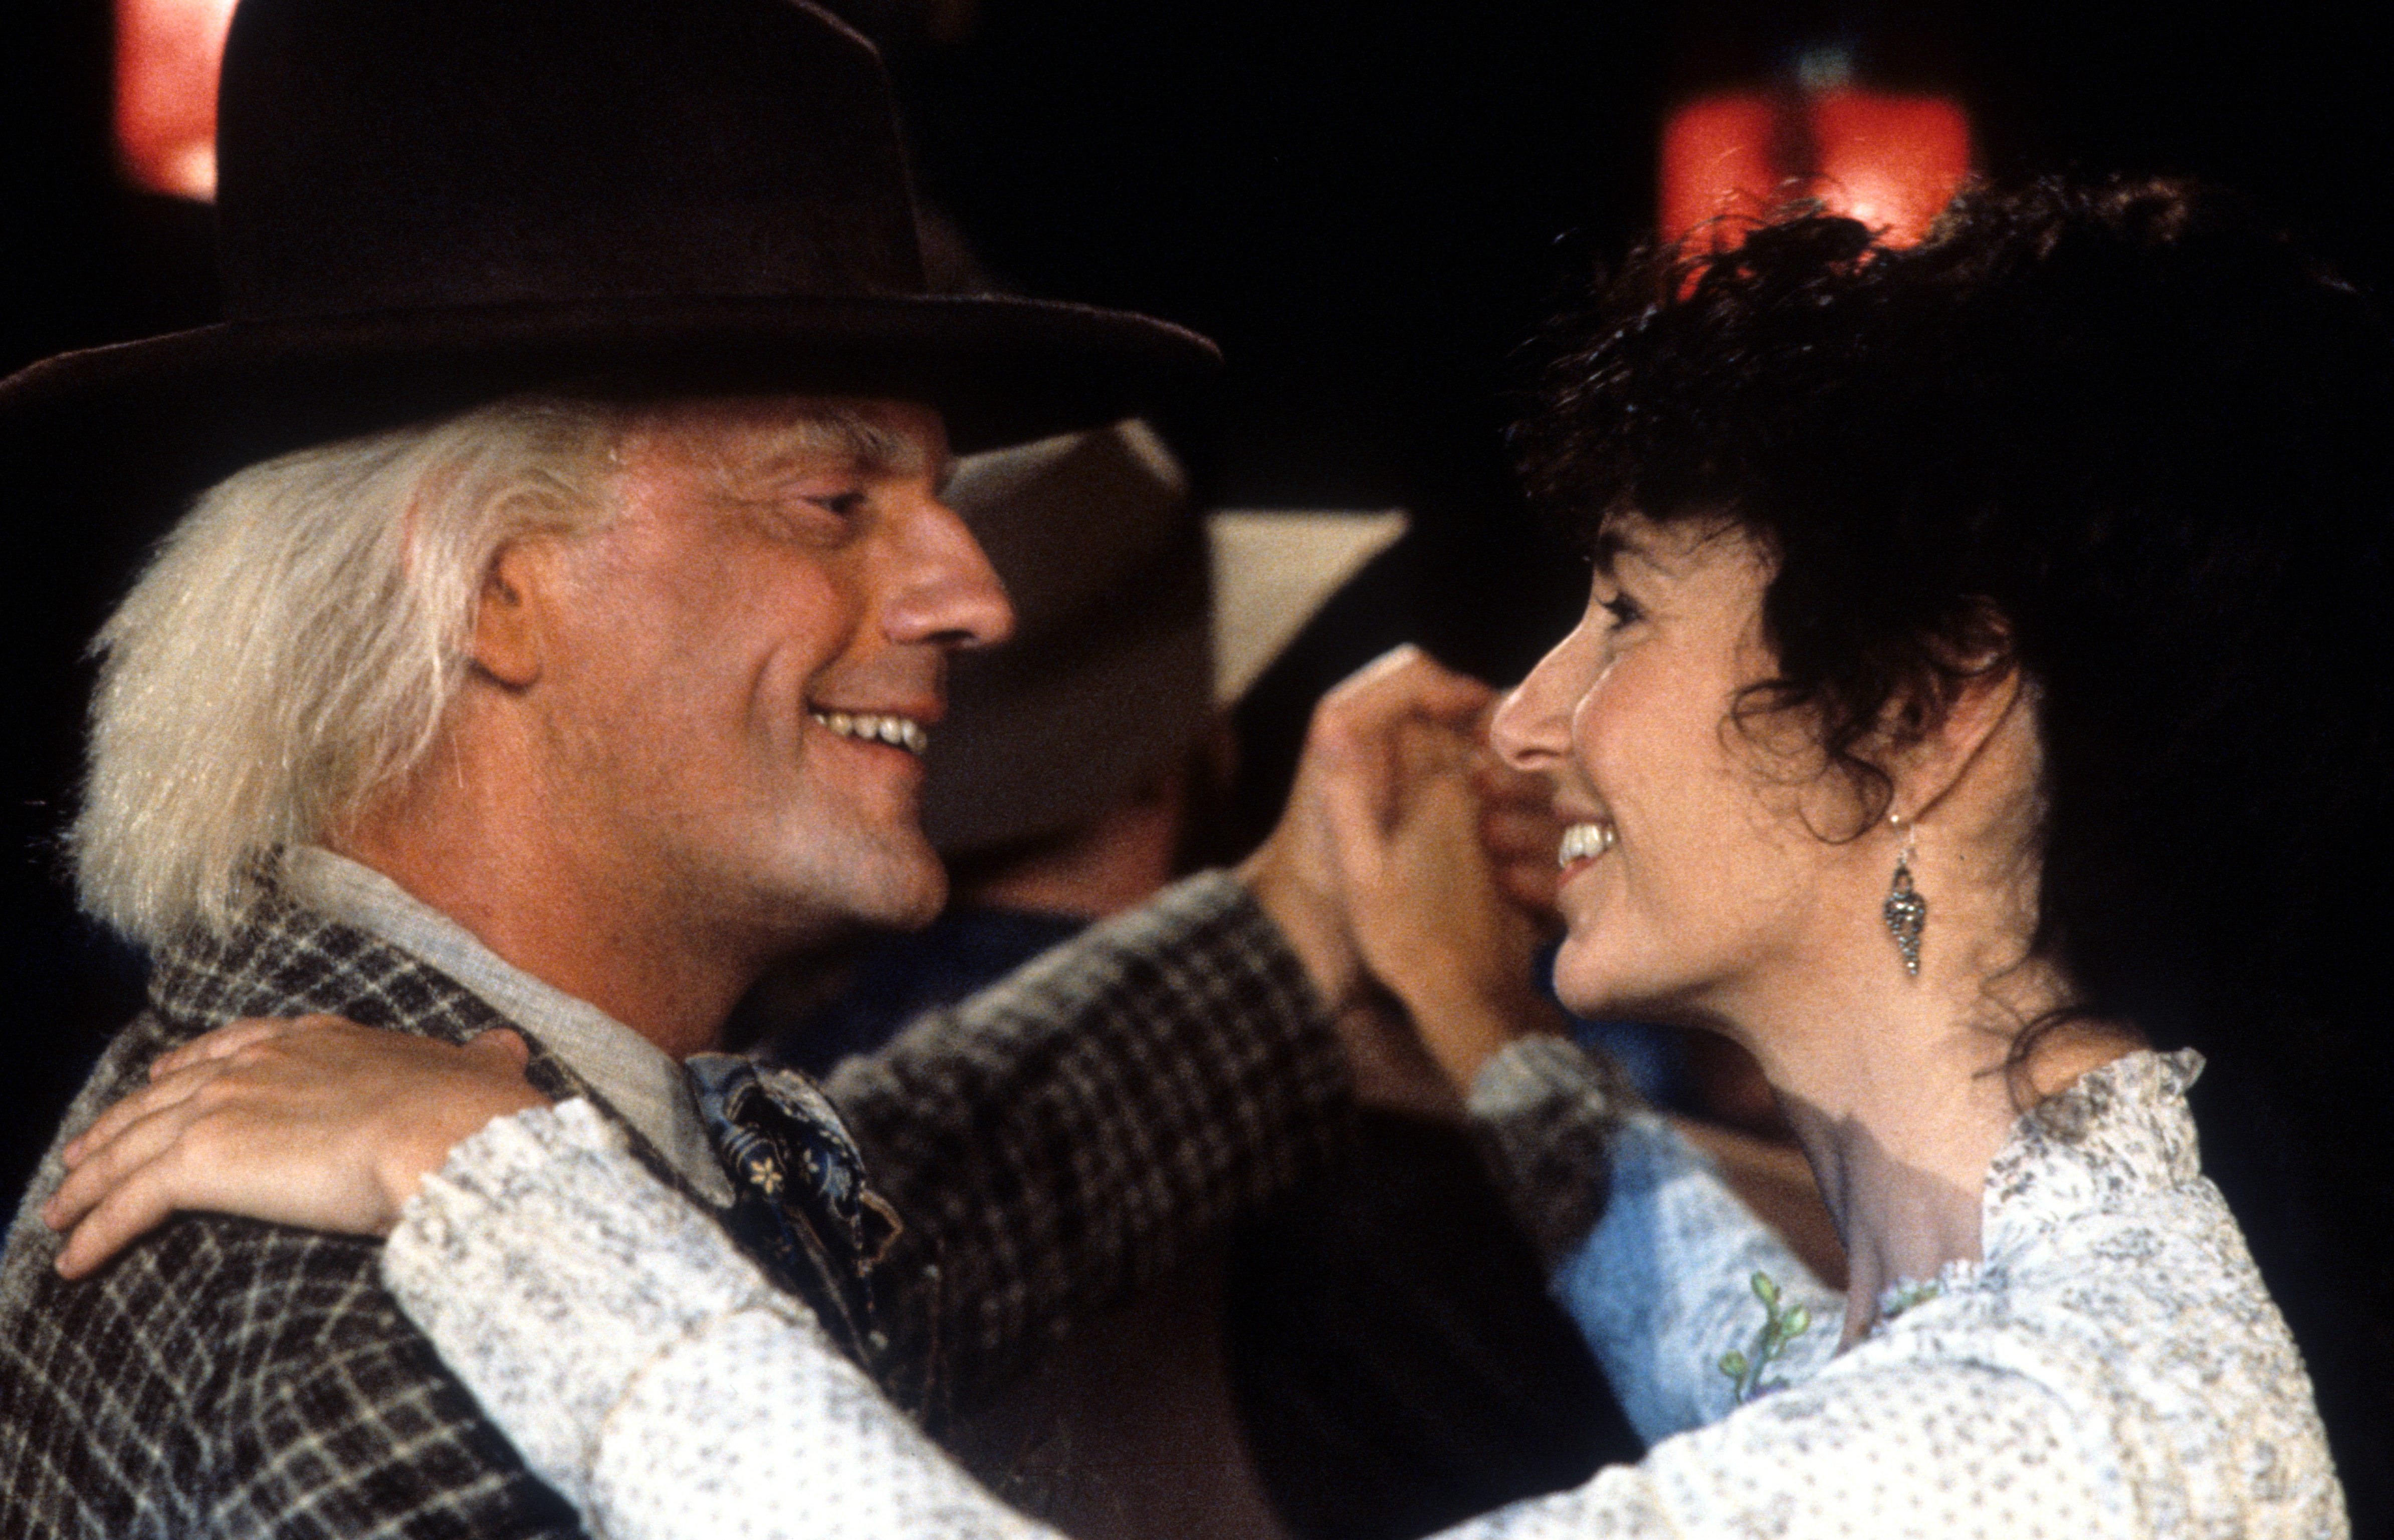 Christopher Lloyd and Mary Steenburgen in a scene from "Back to the Future 3" in 1990 | Source: Getty Images